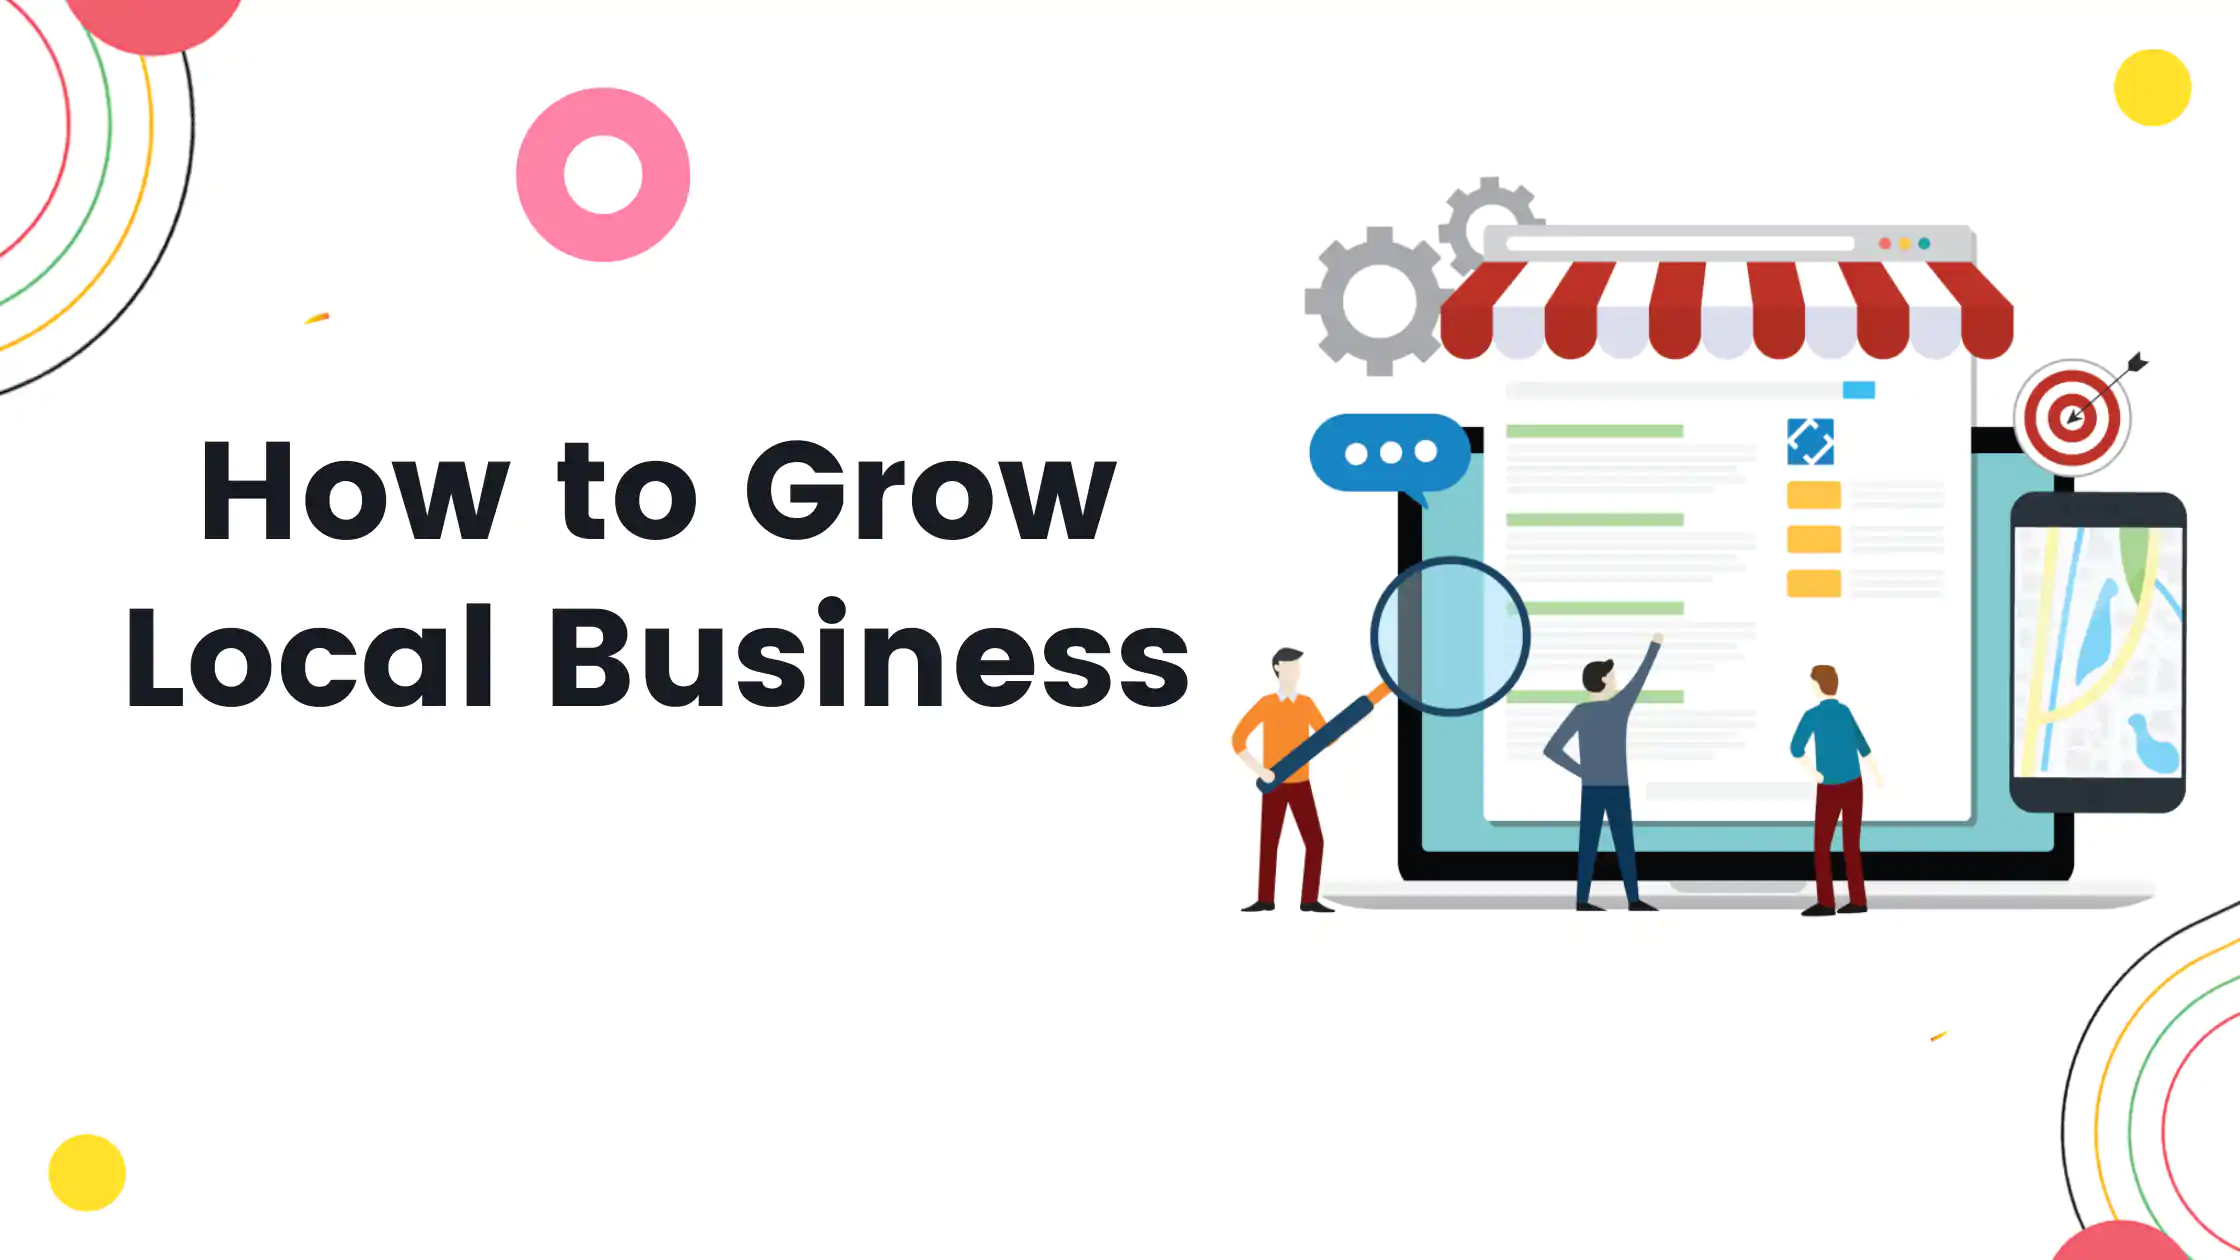 How to Grow Local Business